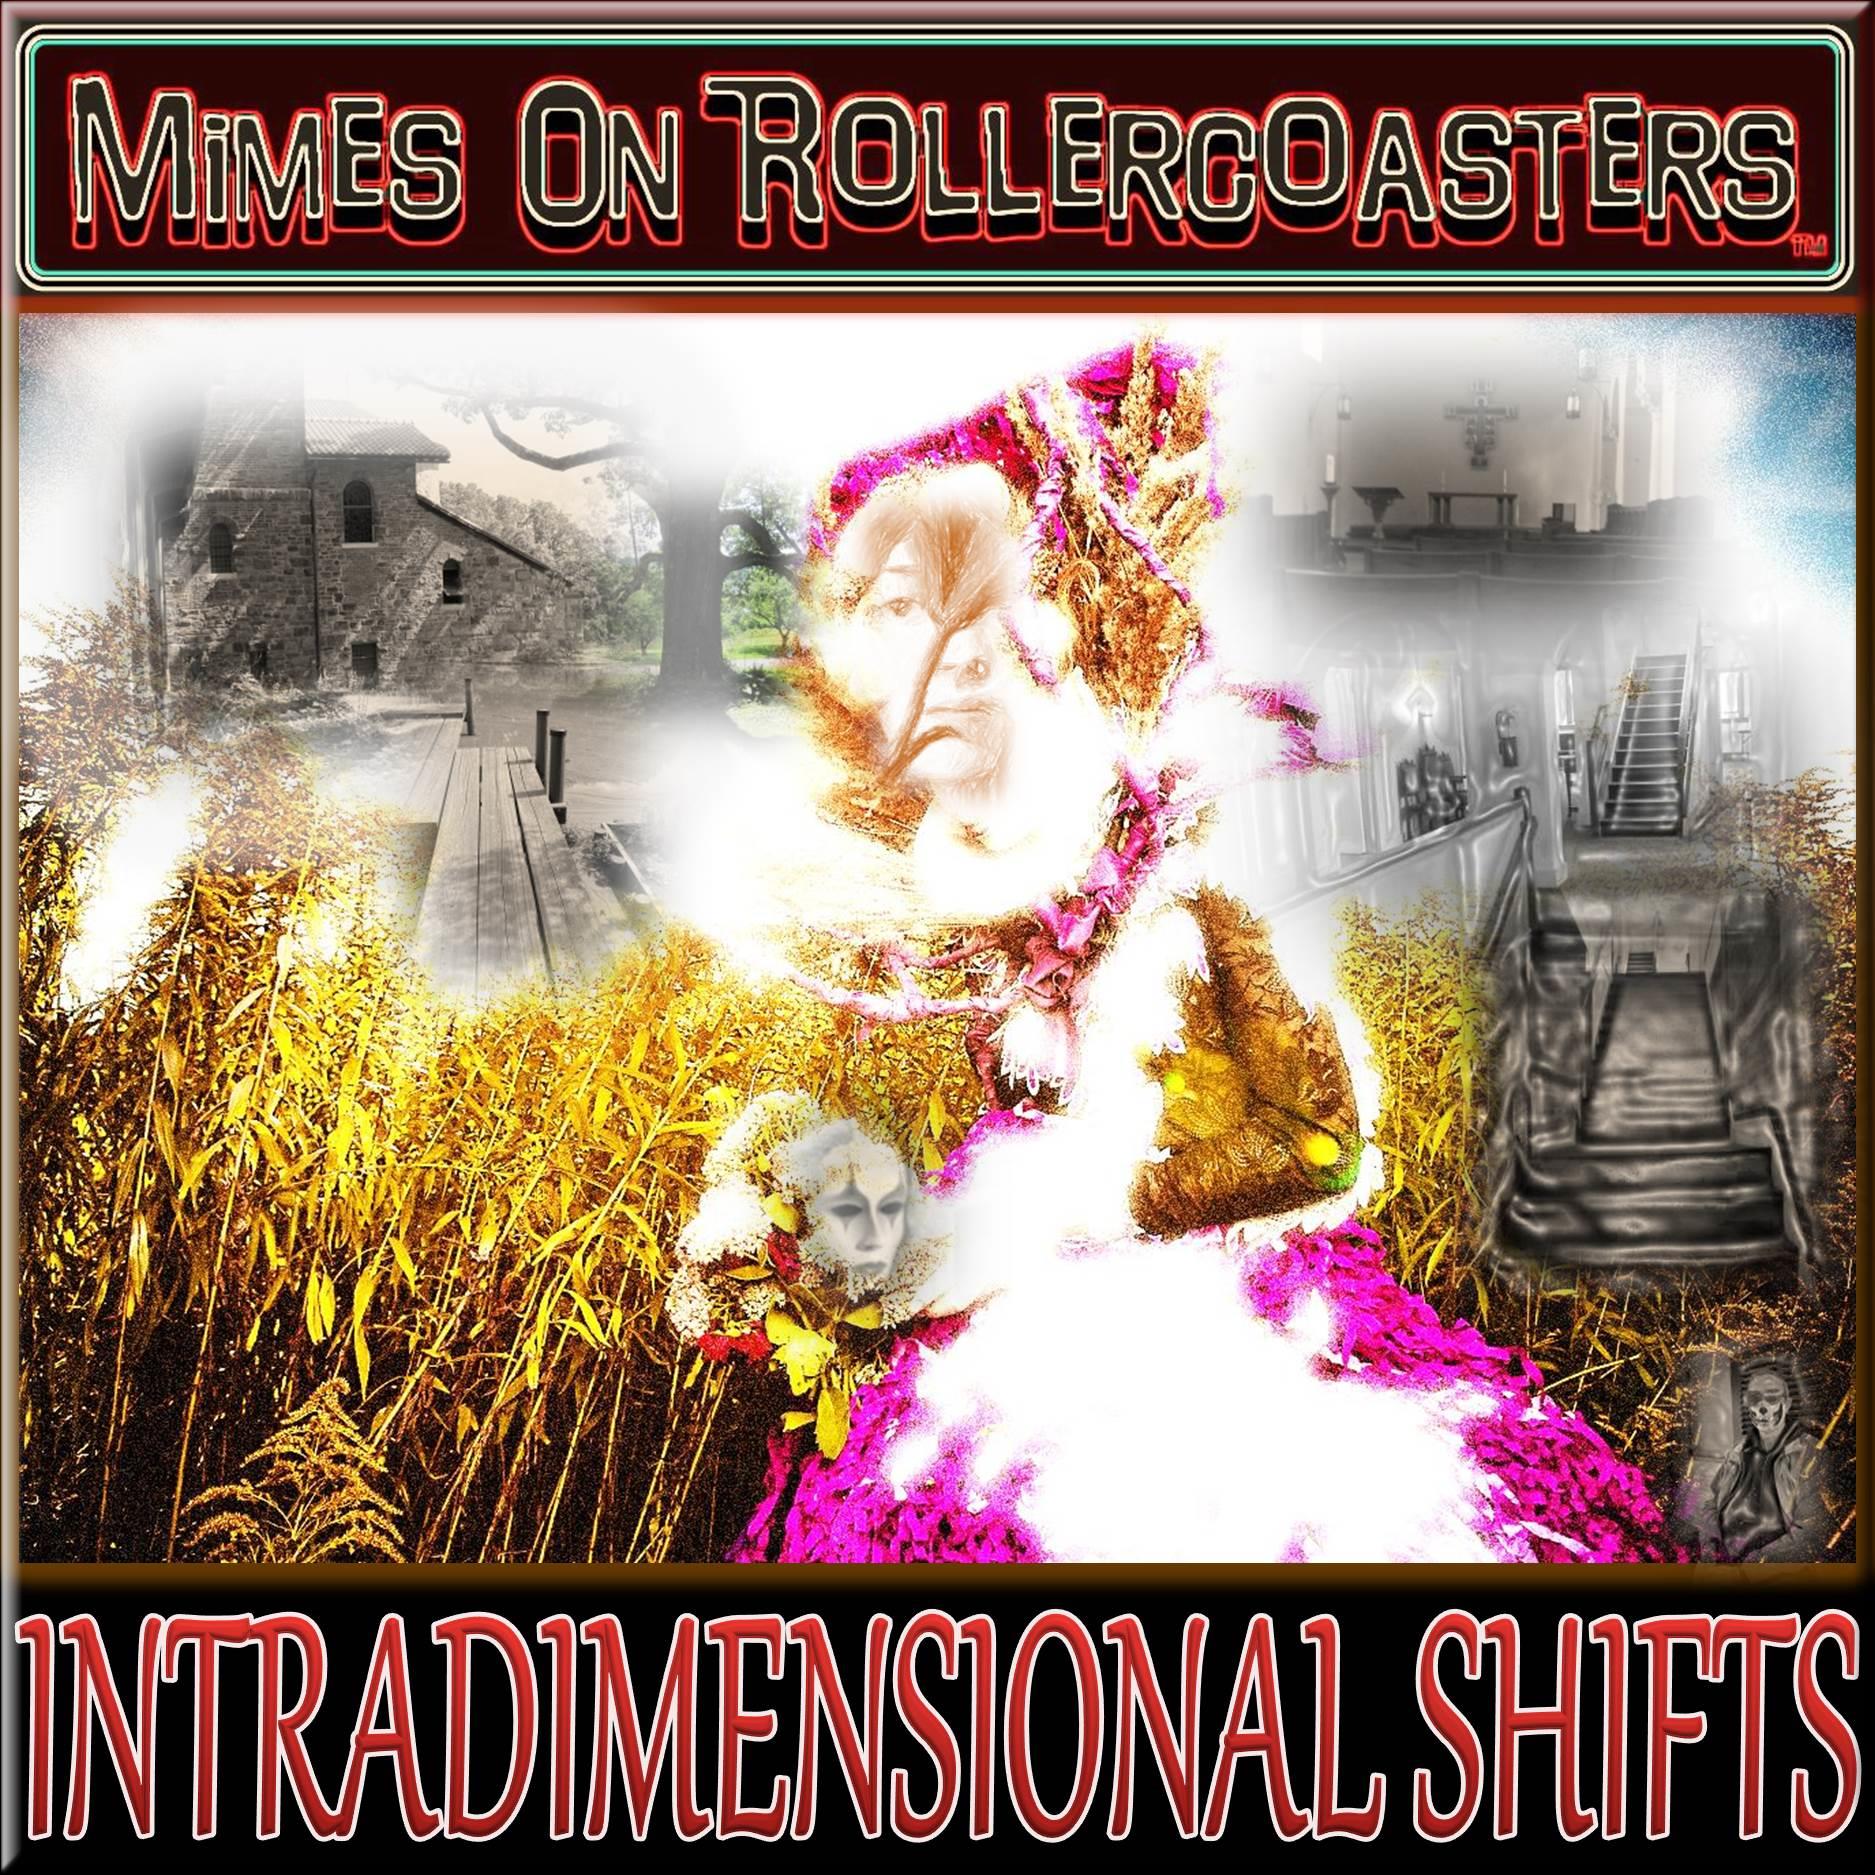 Mimes On Rollercoasters™ - Intradimensional Shifts